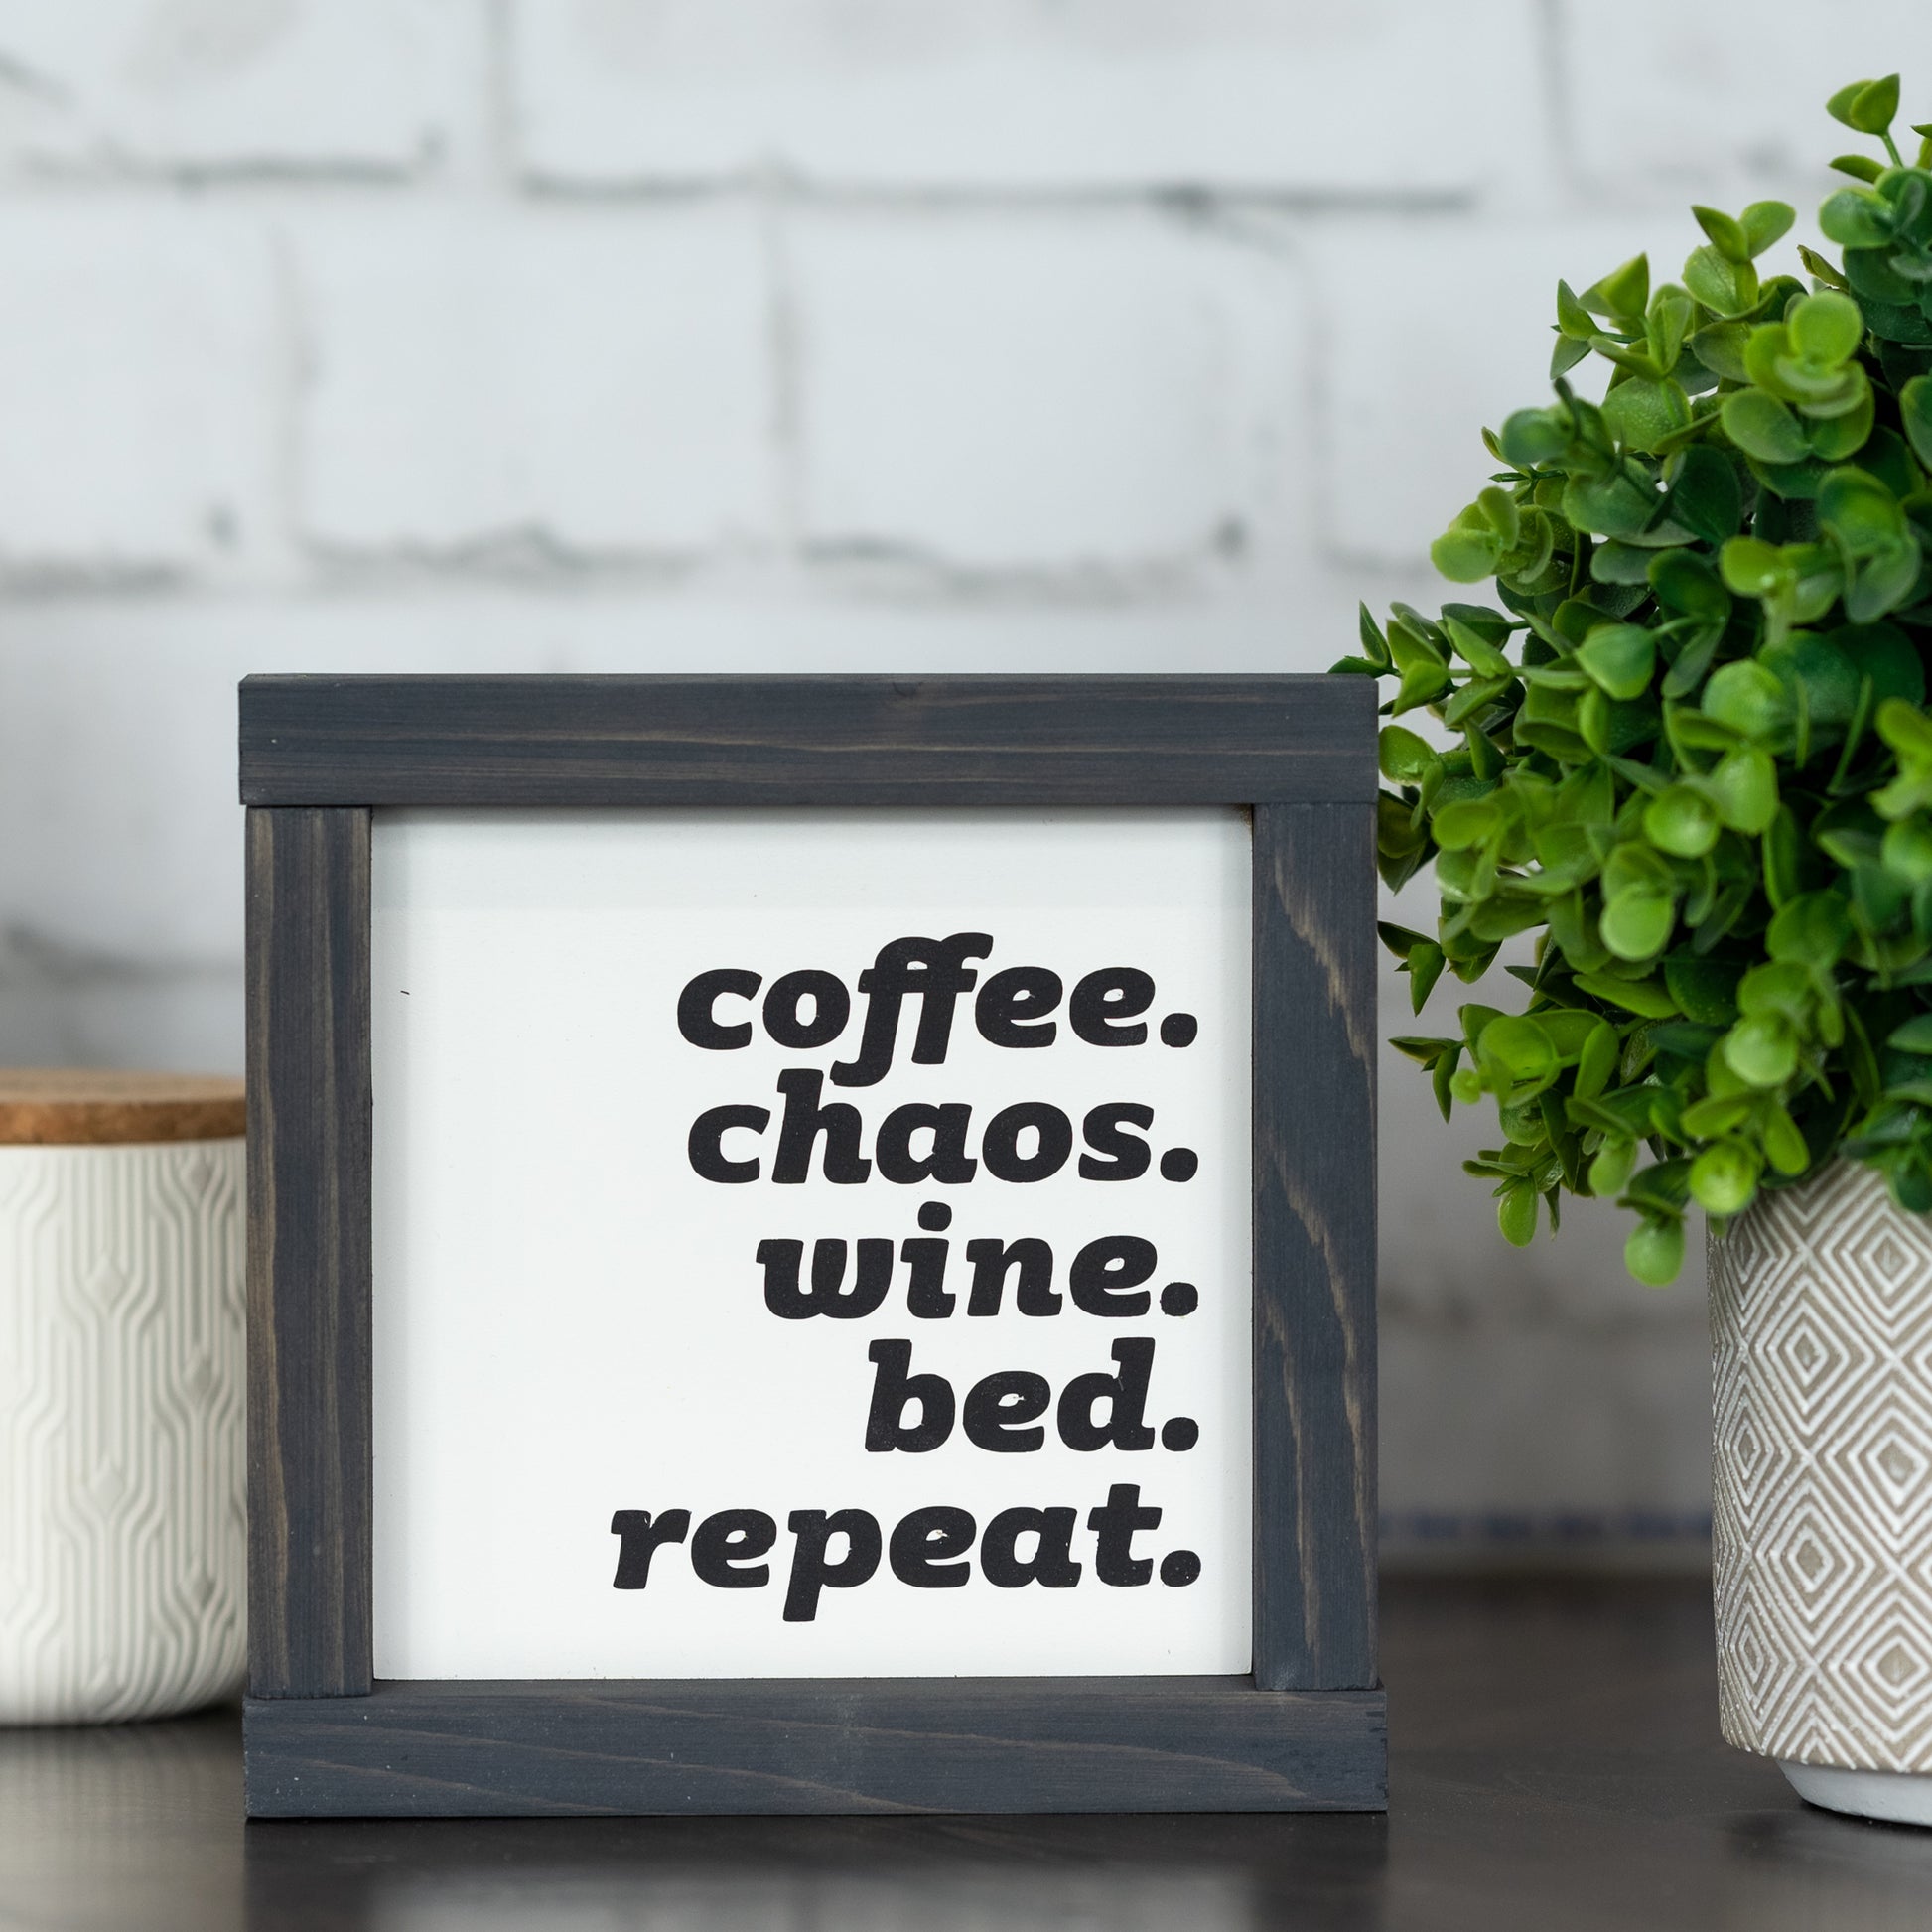 coffee. chaos. wine. bed. repeat ~ wood sign